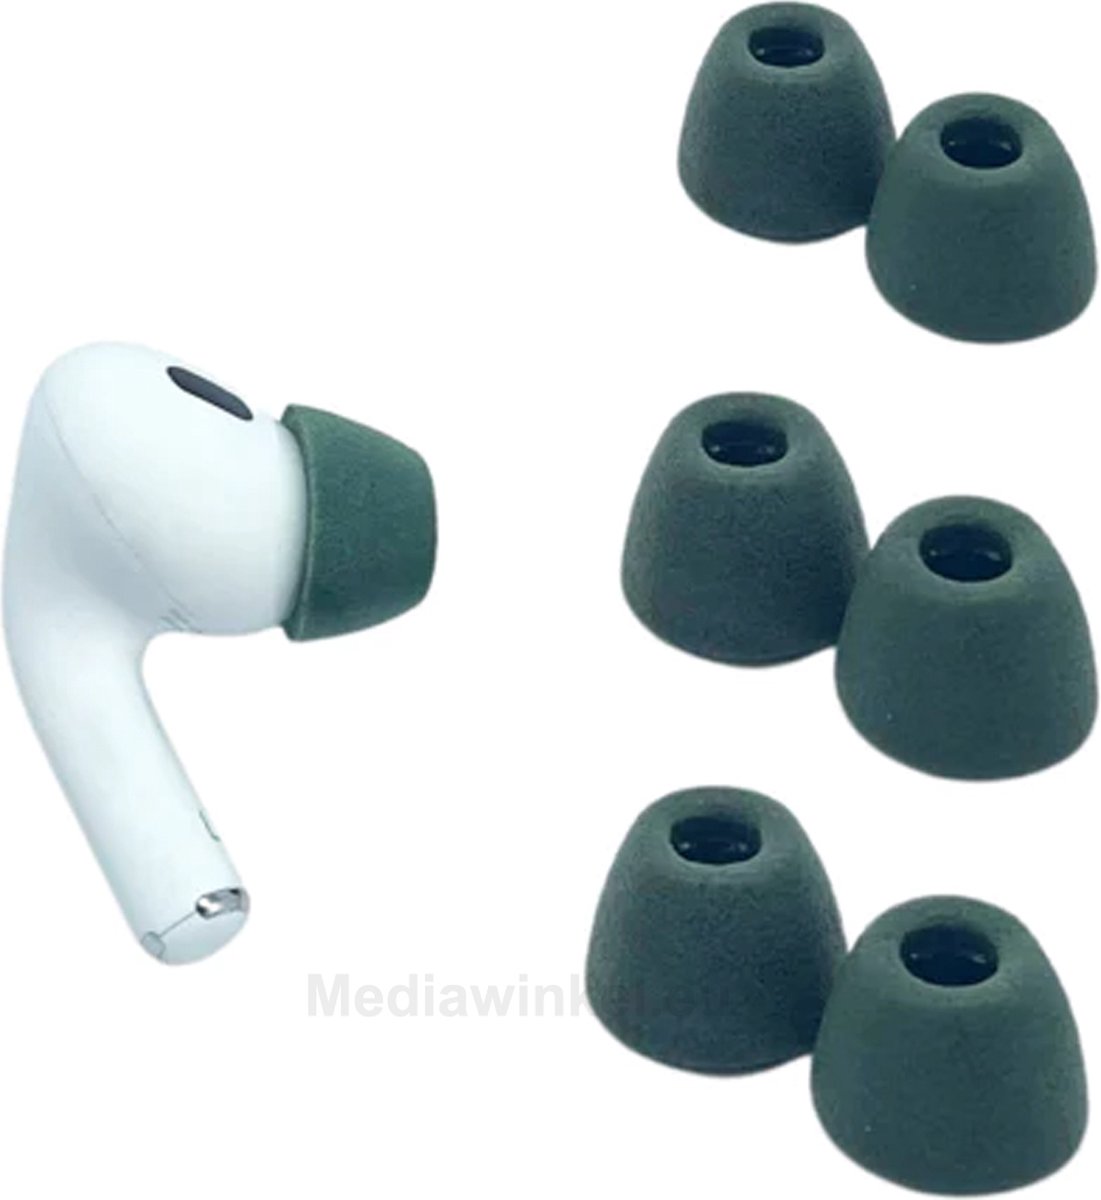 Comply Foam Tips 2.0 voor AirPods Pro, size: small, Pine